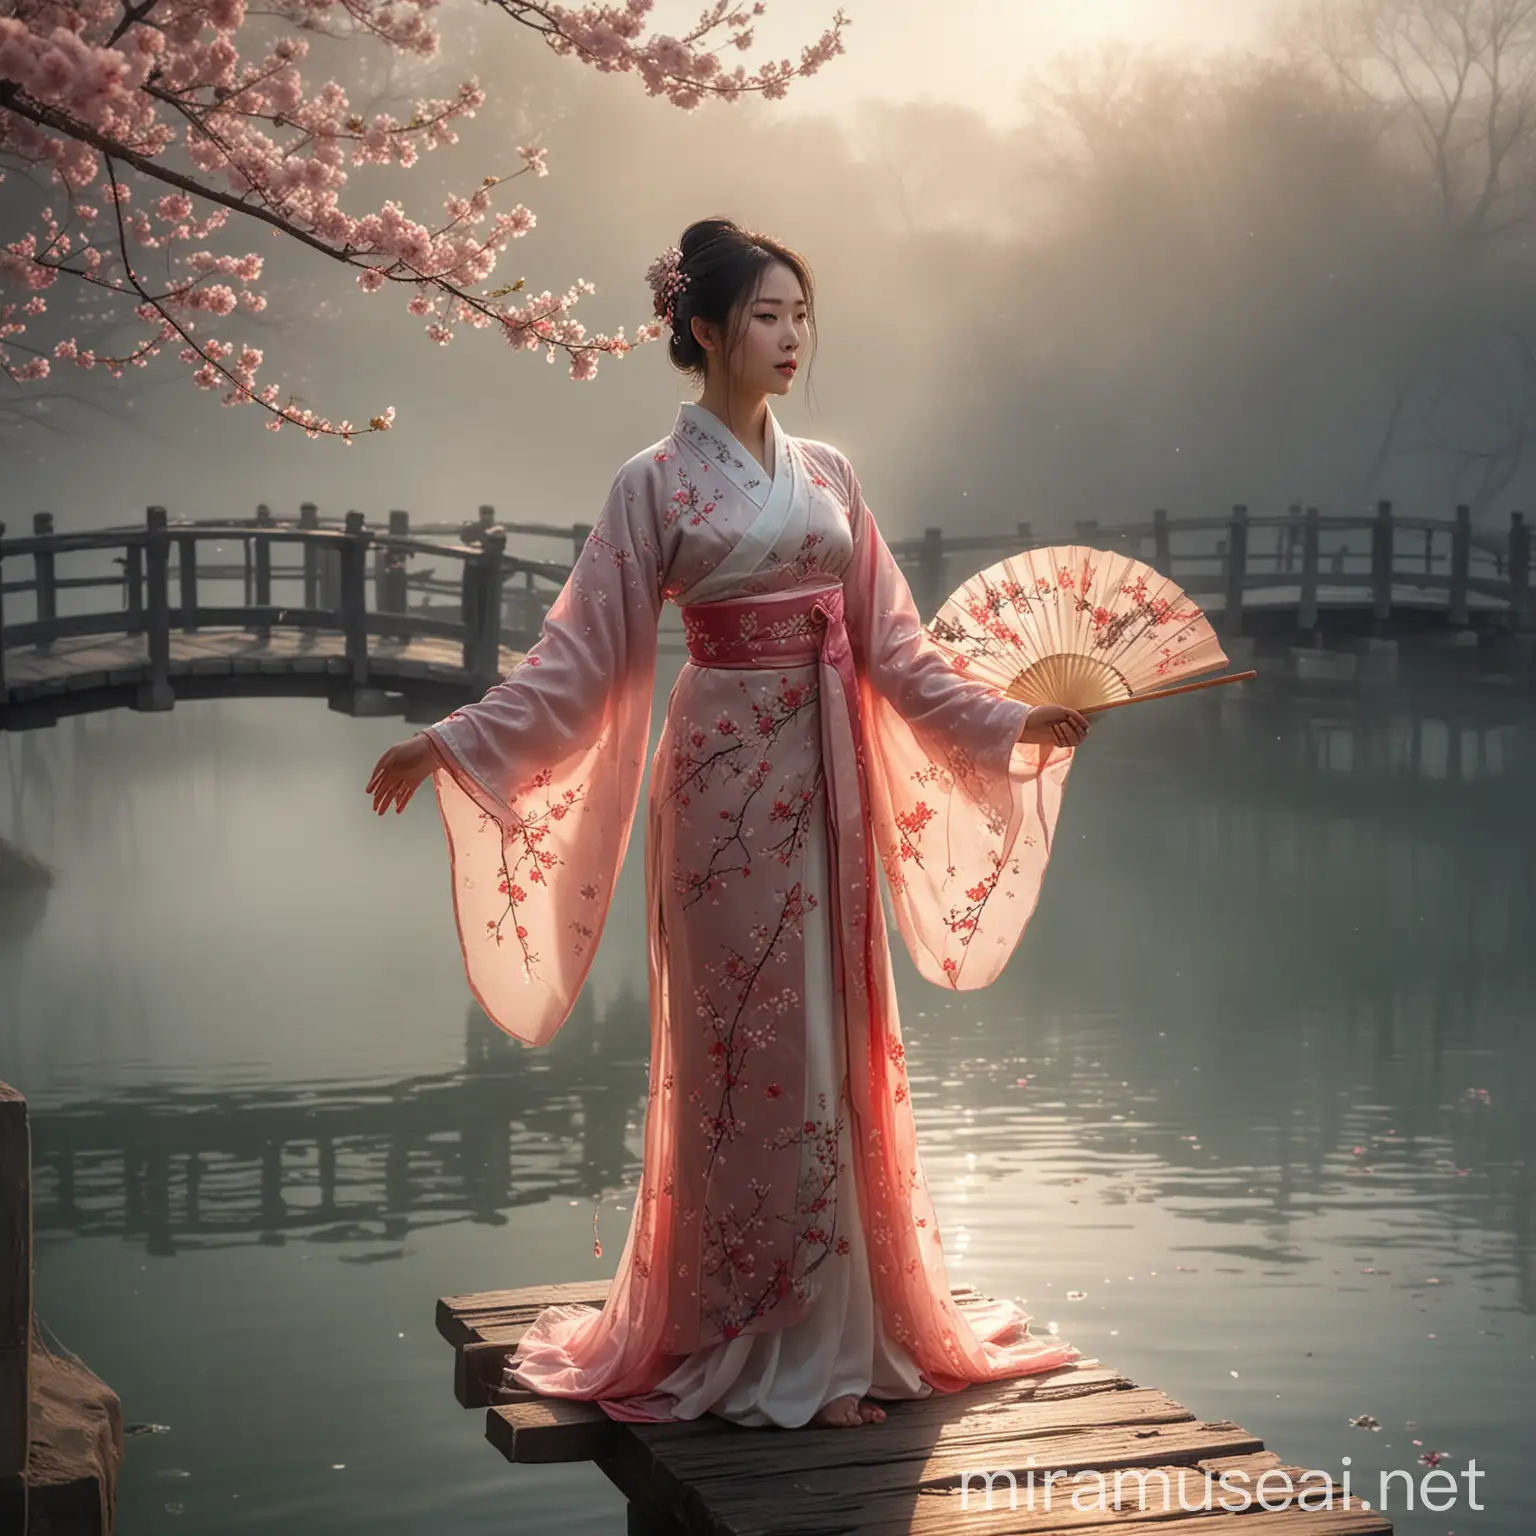 Chinese Woman in Traditional Attire with Fan on Bridge Amid Cherry Blossoms at Sunrise